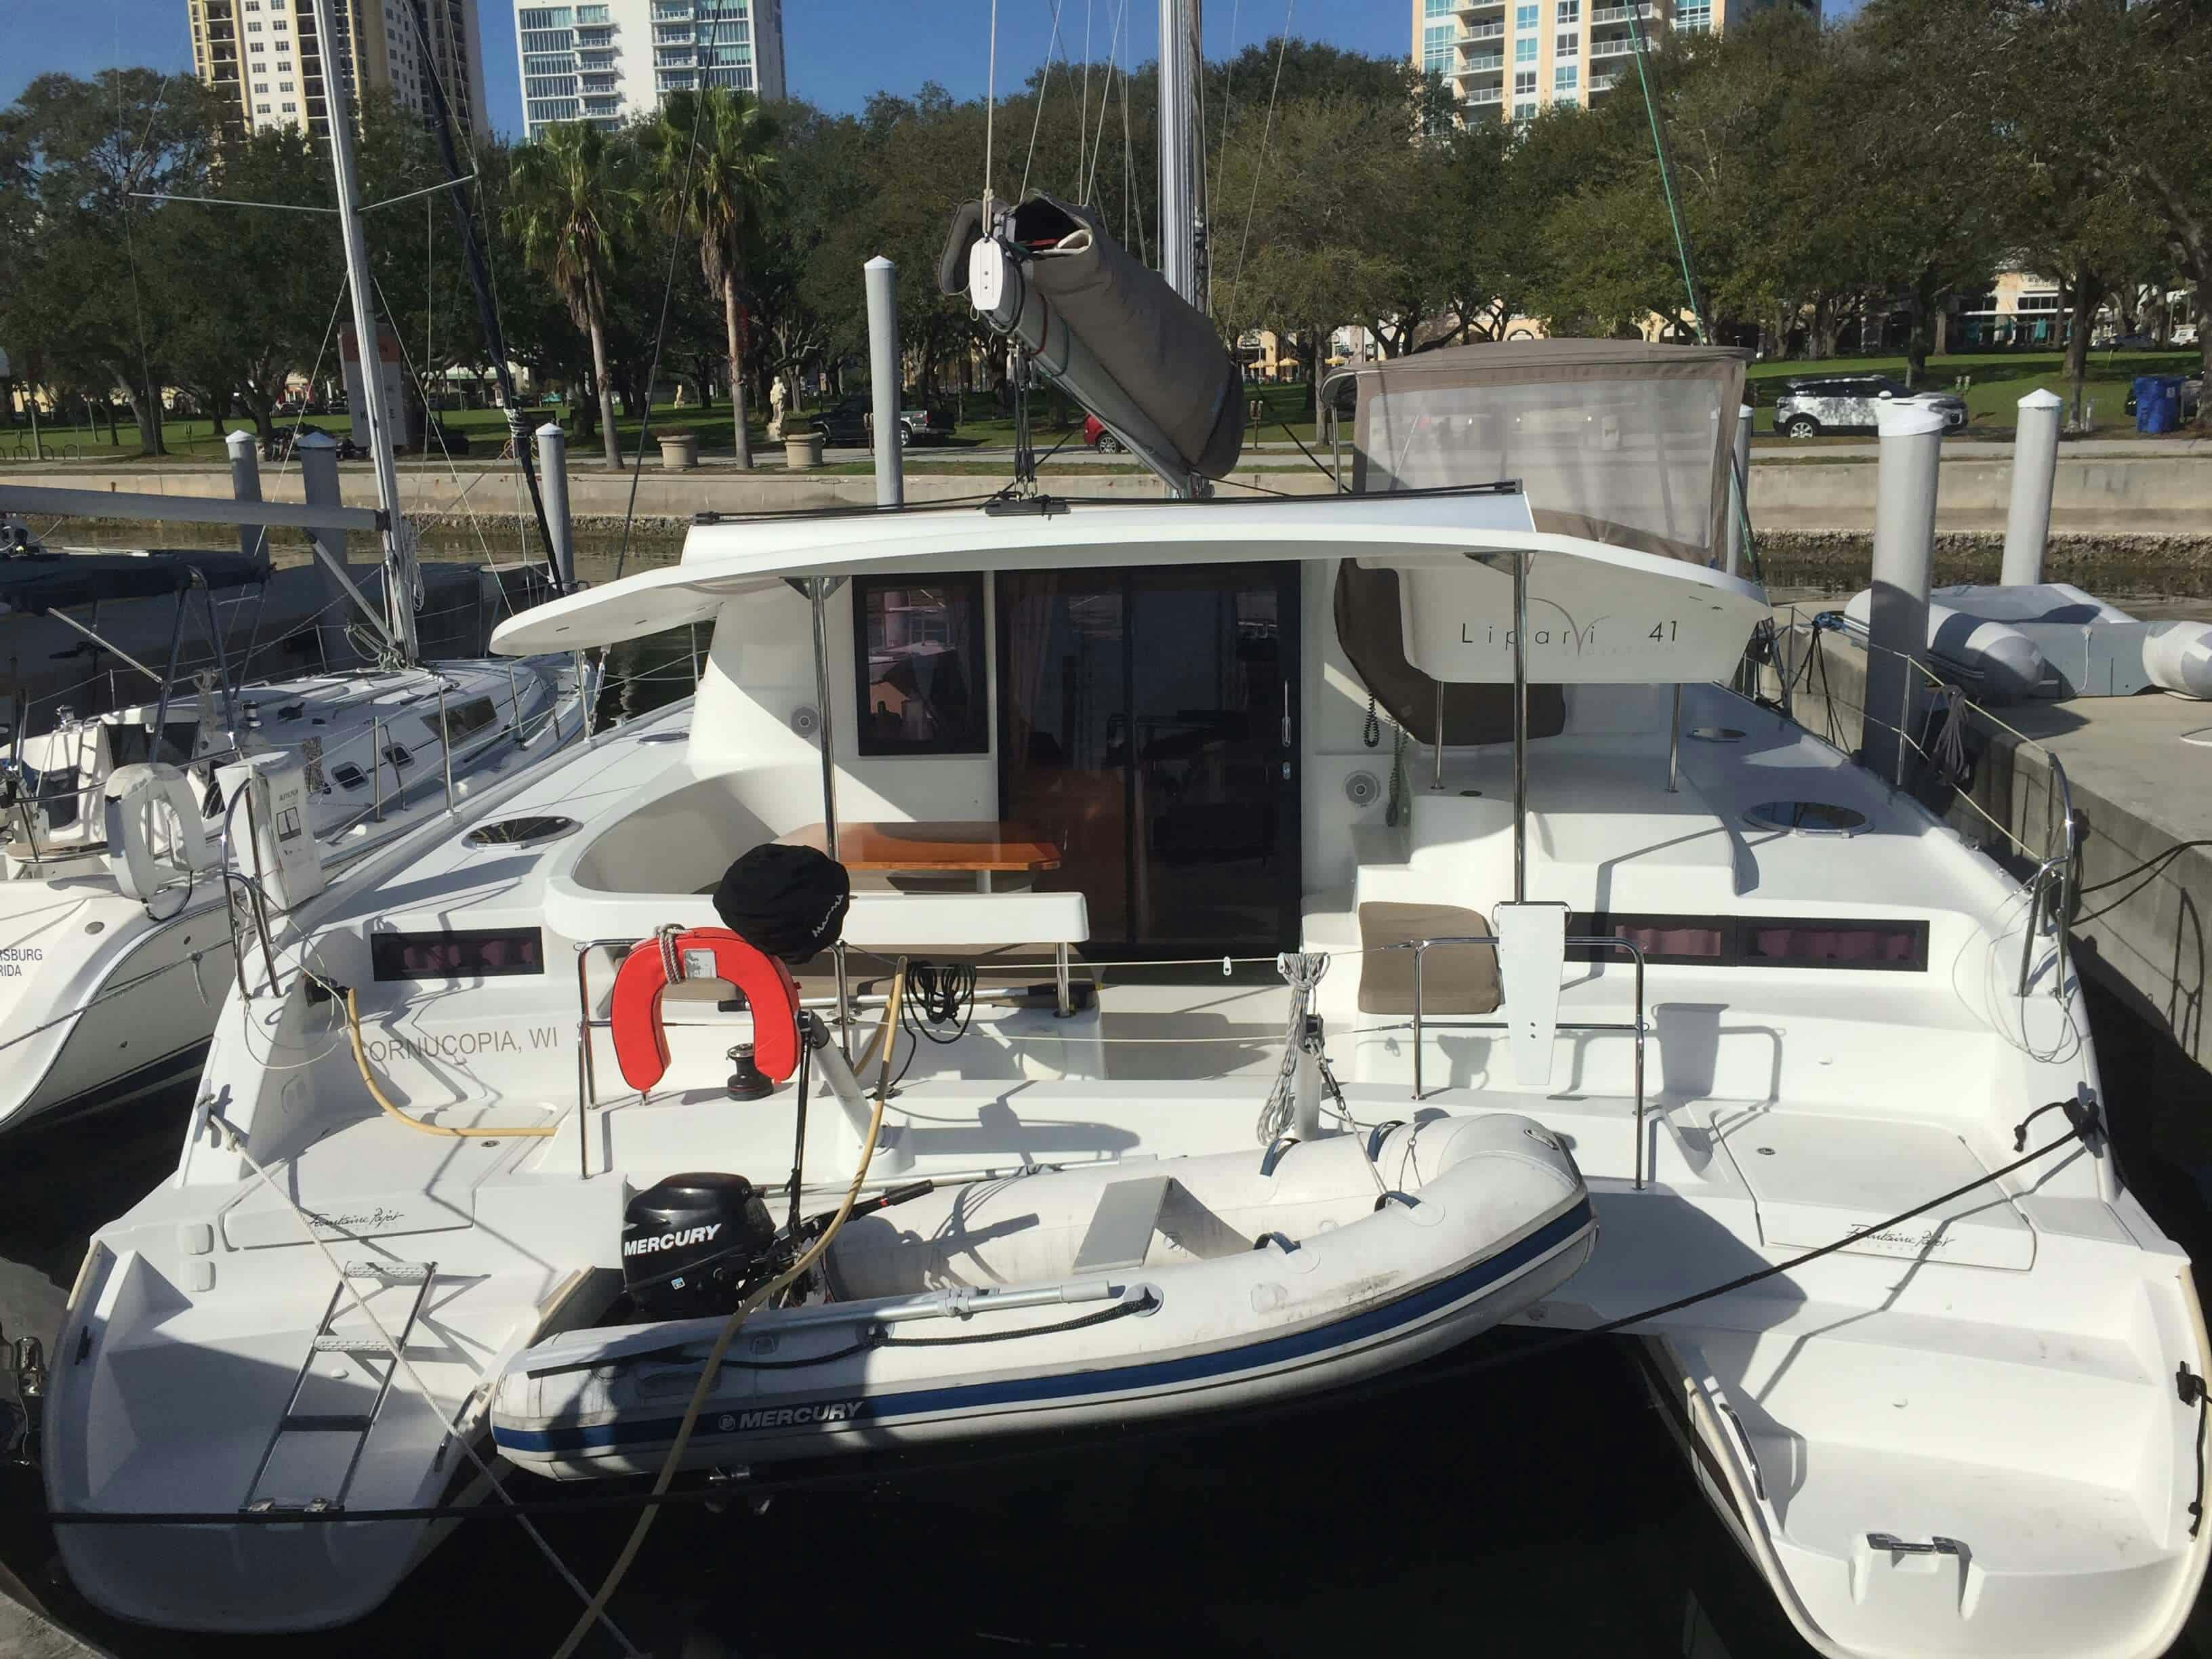 Book Lipari 41 - 3 cab. Catamaran for bareboat charter in St. Petersburg, Vinoy Marina, Florida, USA with TripYacht!, picture 3